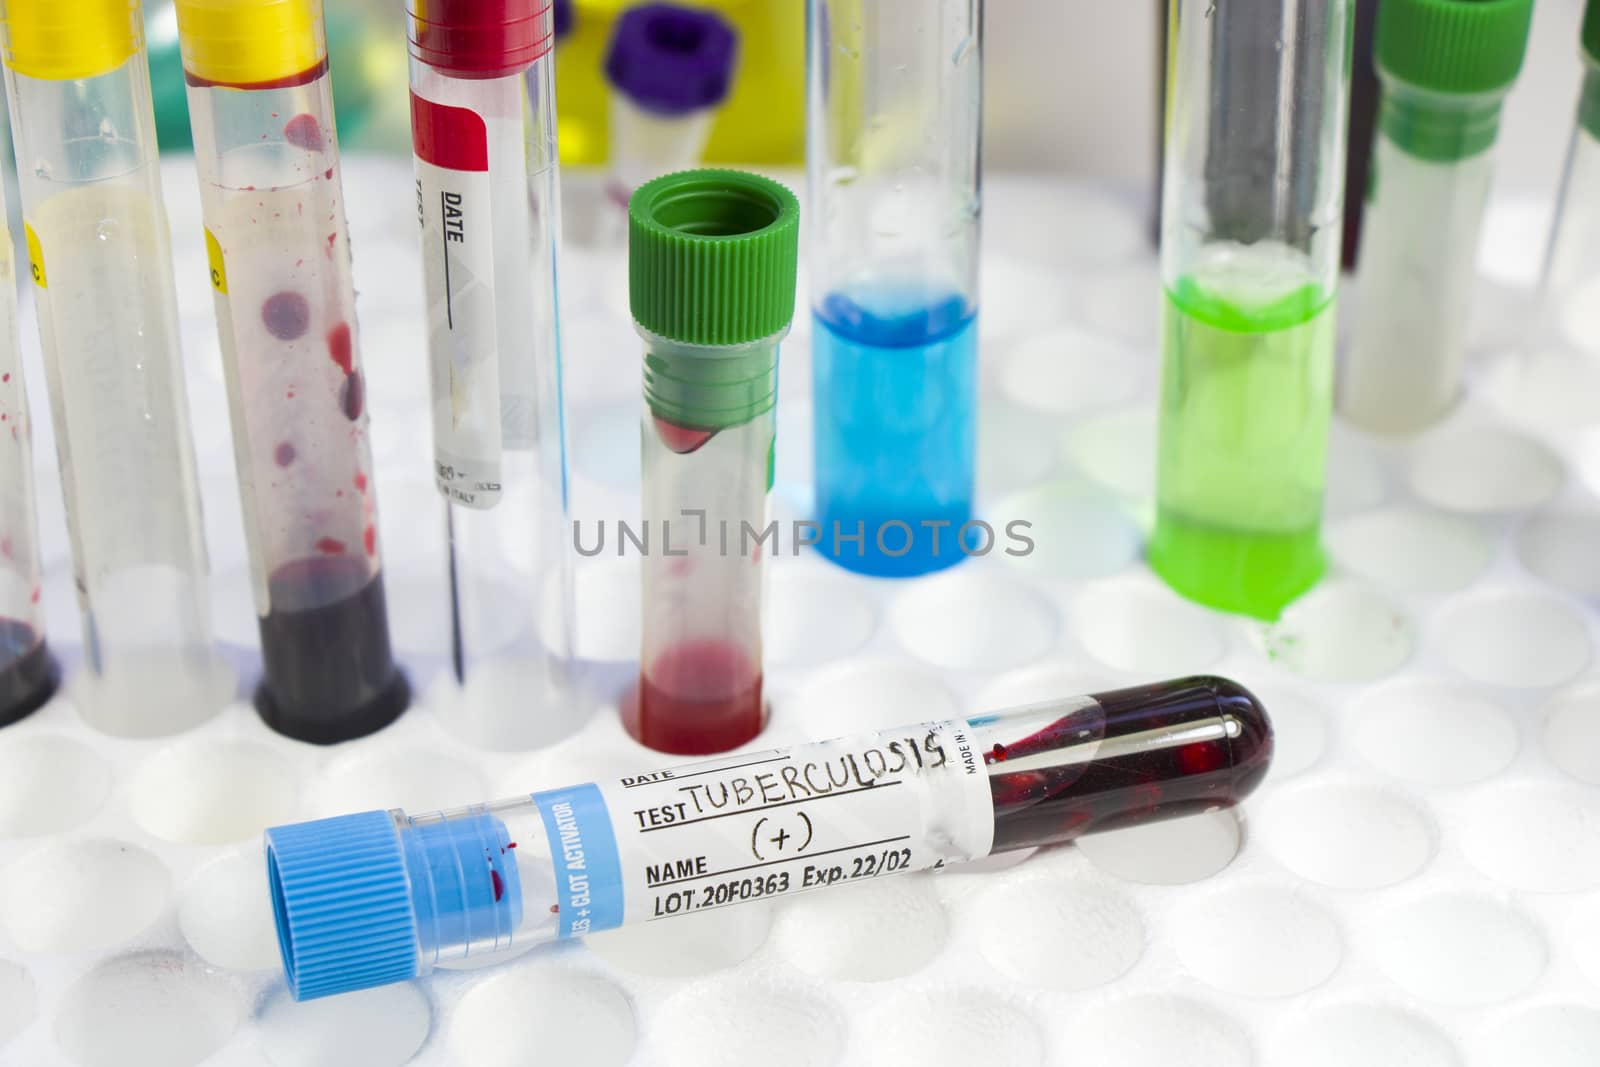 Tuberculosis blood test tube, laboratory and chemical instruments, diagnoses and research by Taidundua